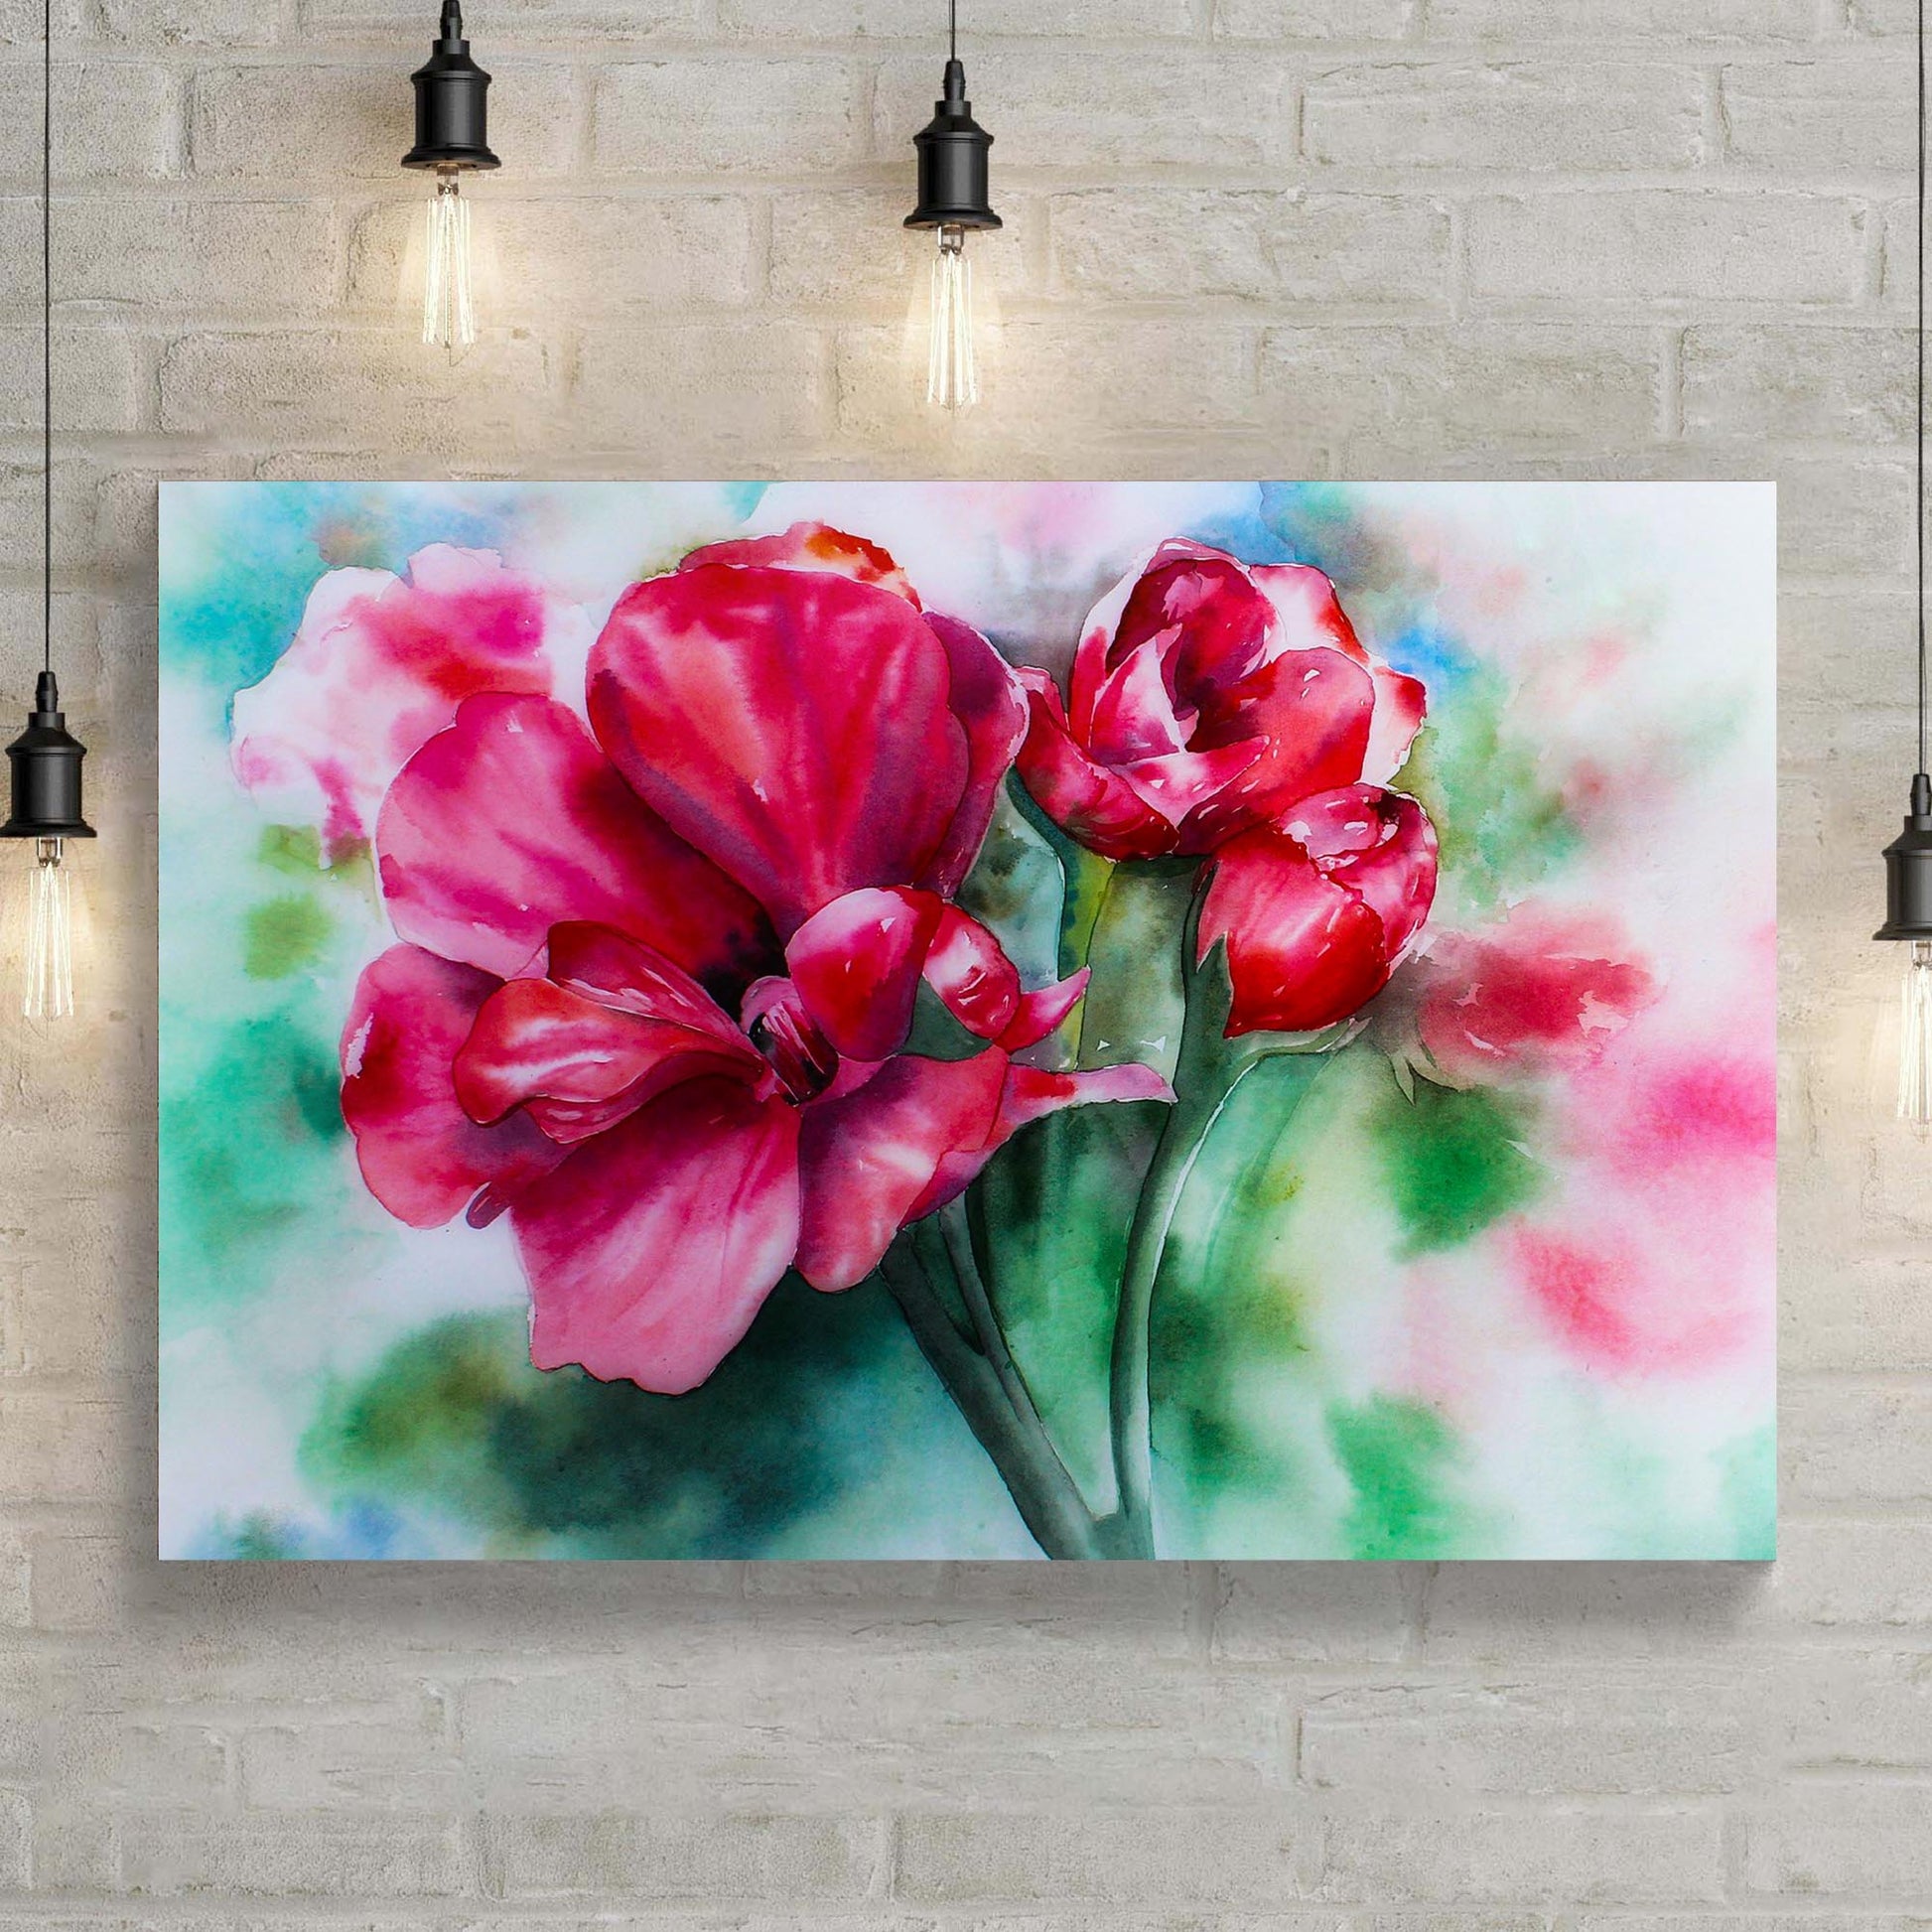 Flowers Geranium Pink Watercolor Canvas Wall Art Style 1 - Image by Tailored Canvases